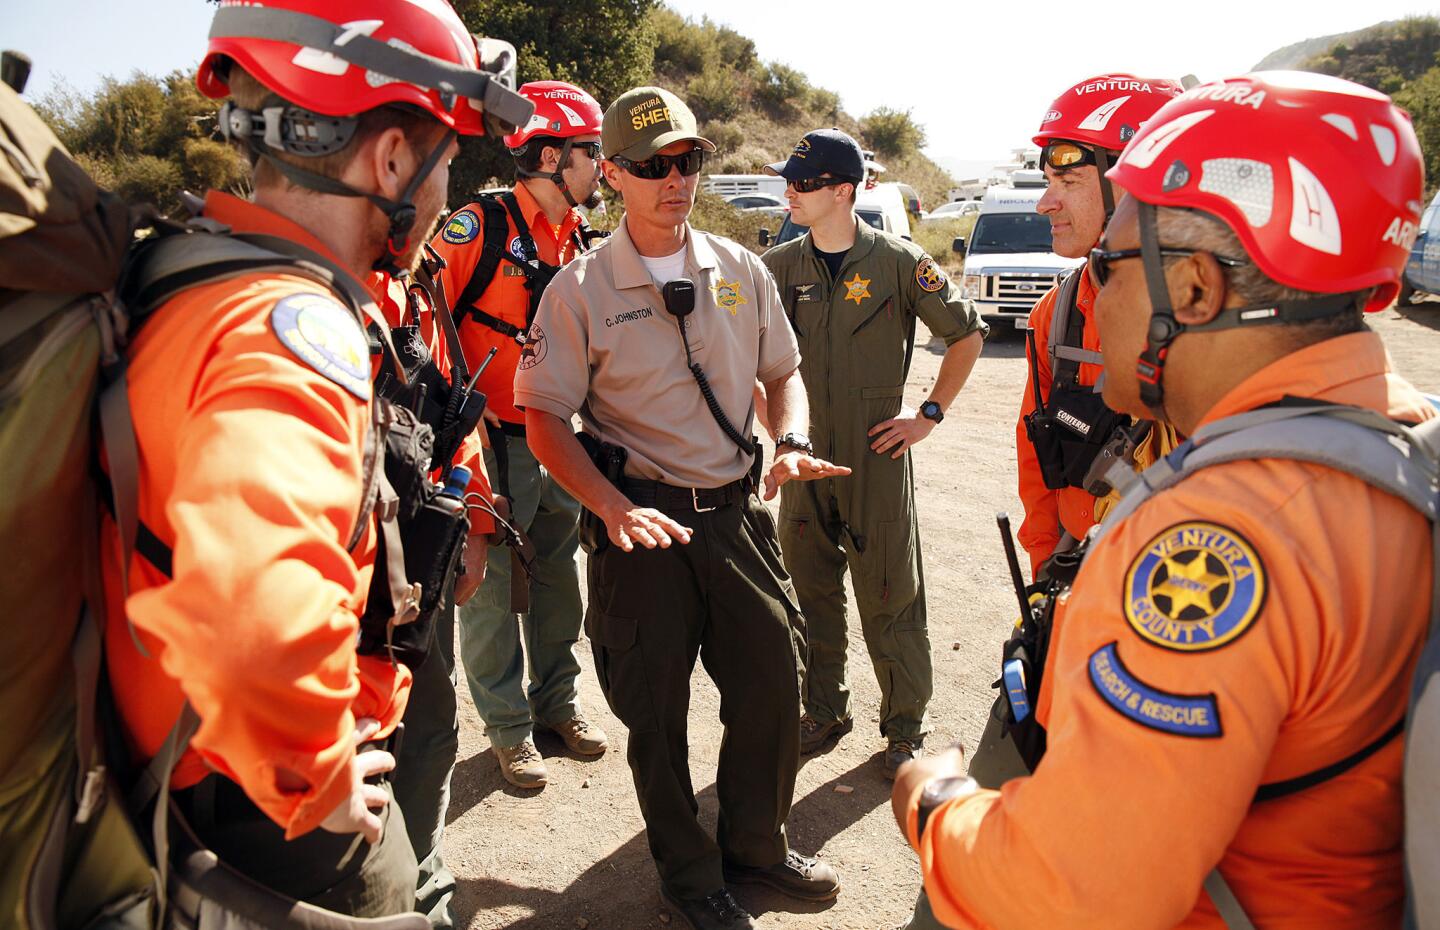 Ventura County Sheriff's Deputy Chris Johnston, center, holds a pre-flight briefing with members of Ventura County Sheriff's Search and Rescue team as they prepare to board a helicopter to search for Mike Herdman, the Arcadia firefighter who went missing June 13.